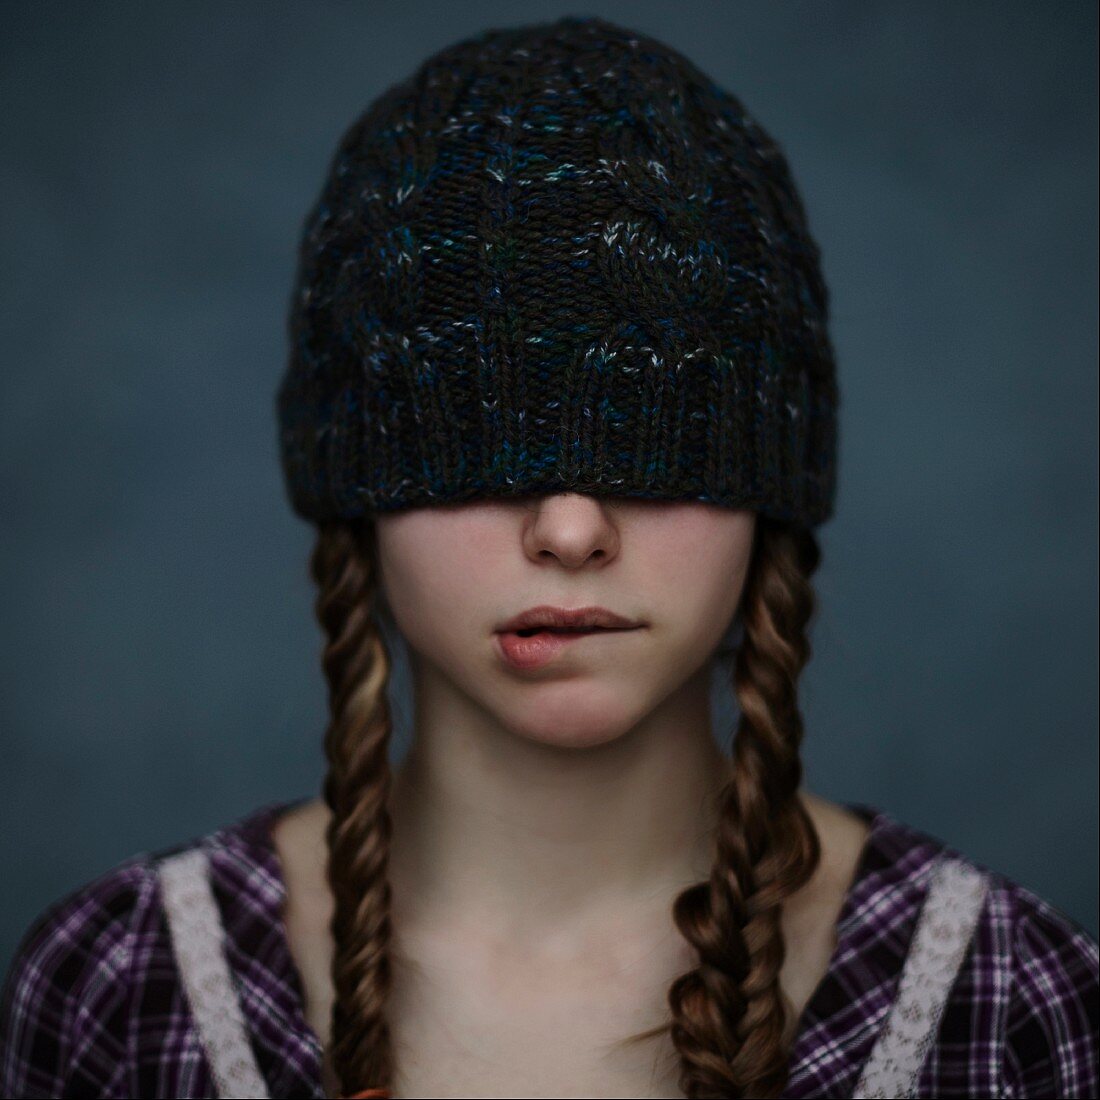 A girl with her hair in two plaits and with a knitted beanie hat over eyes